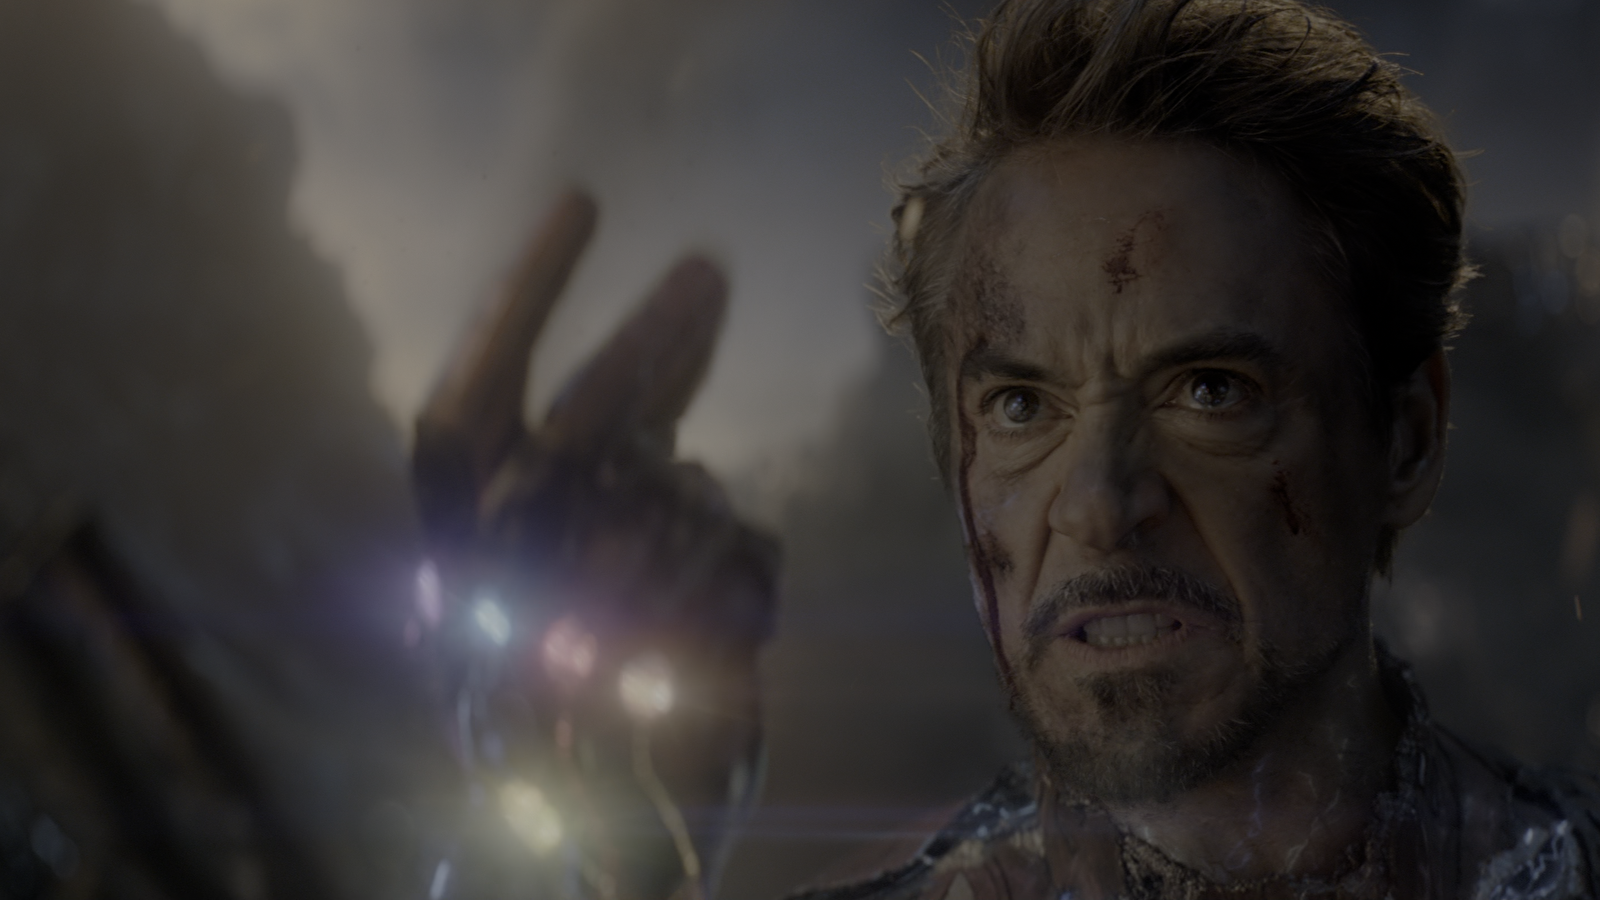 Avengers Endgame Wallpaper (Iron Man and Thanos final battle), more in comments! [3840 x 2160]